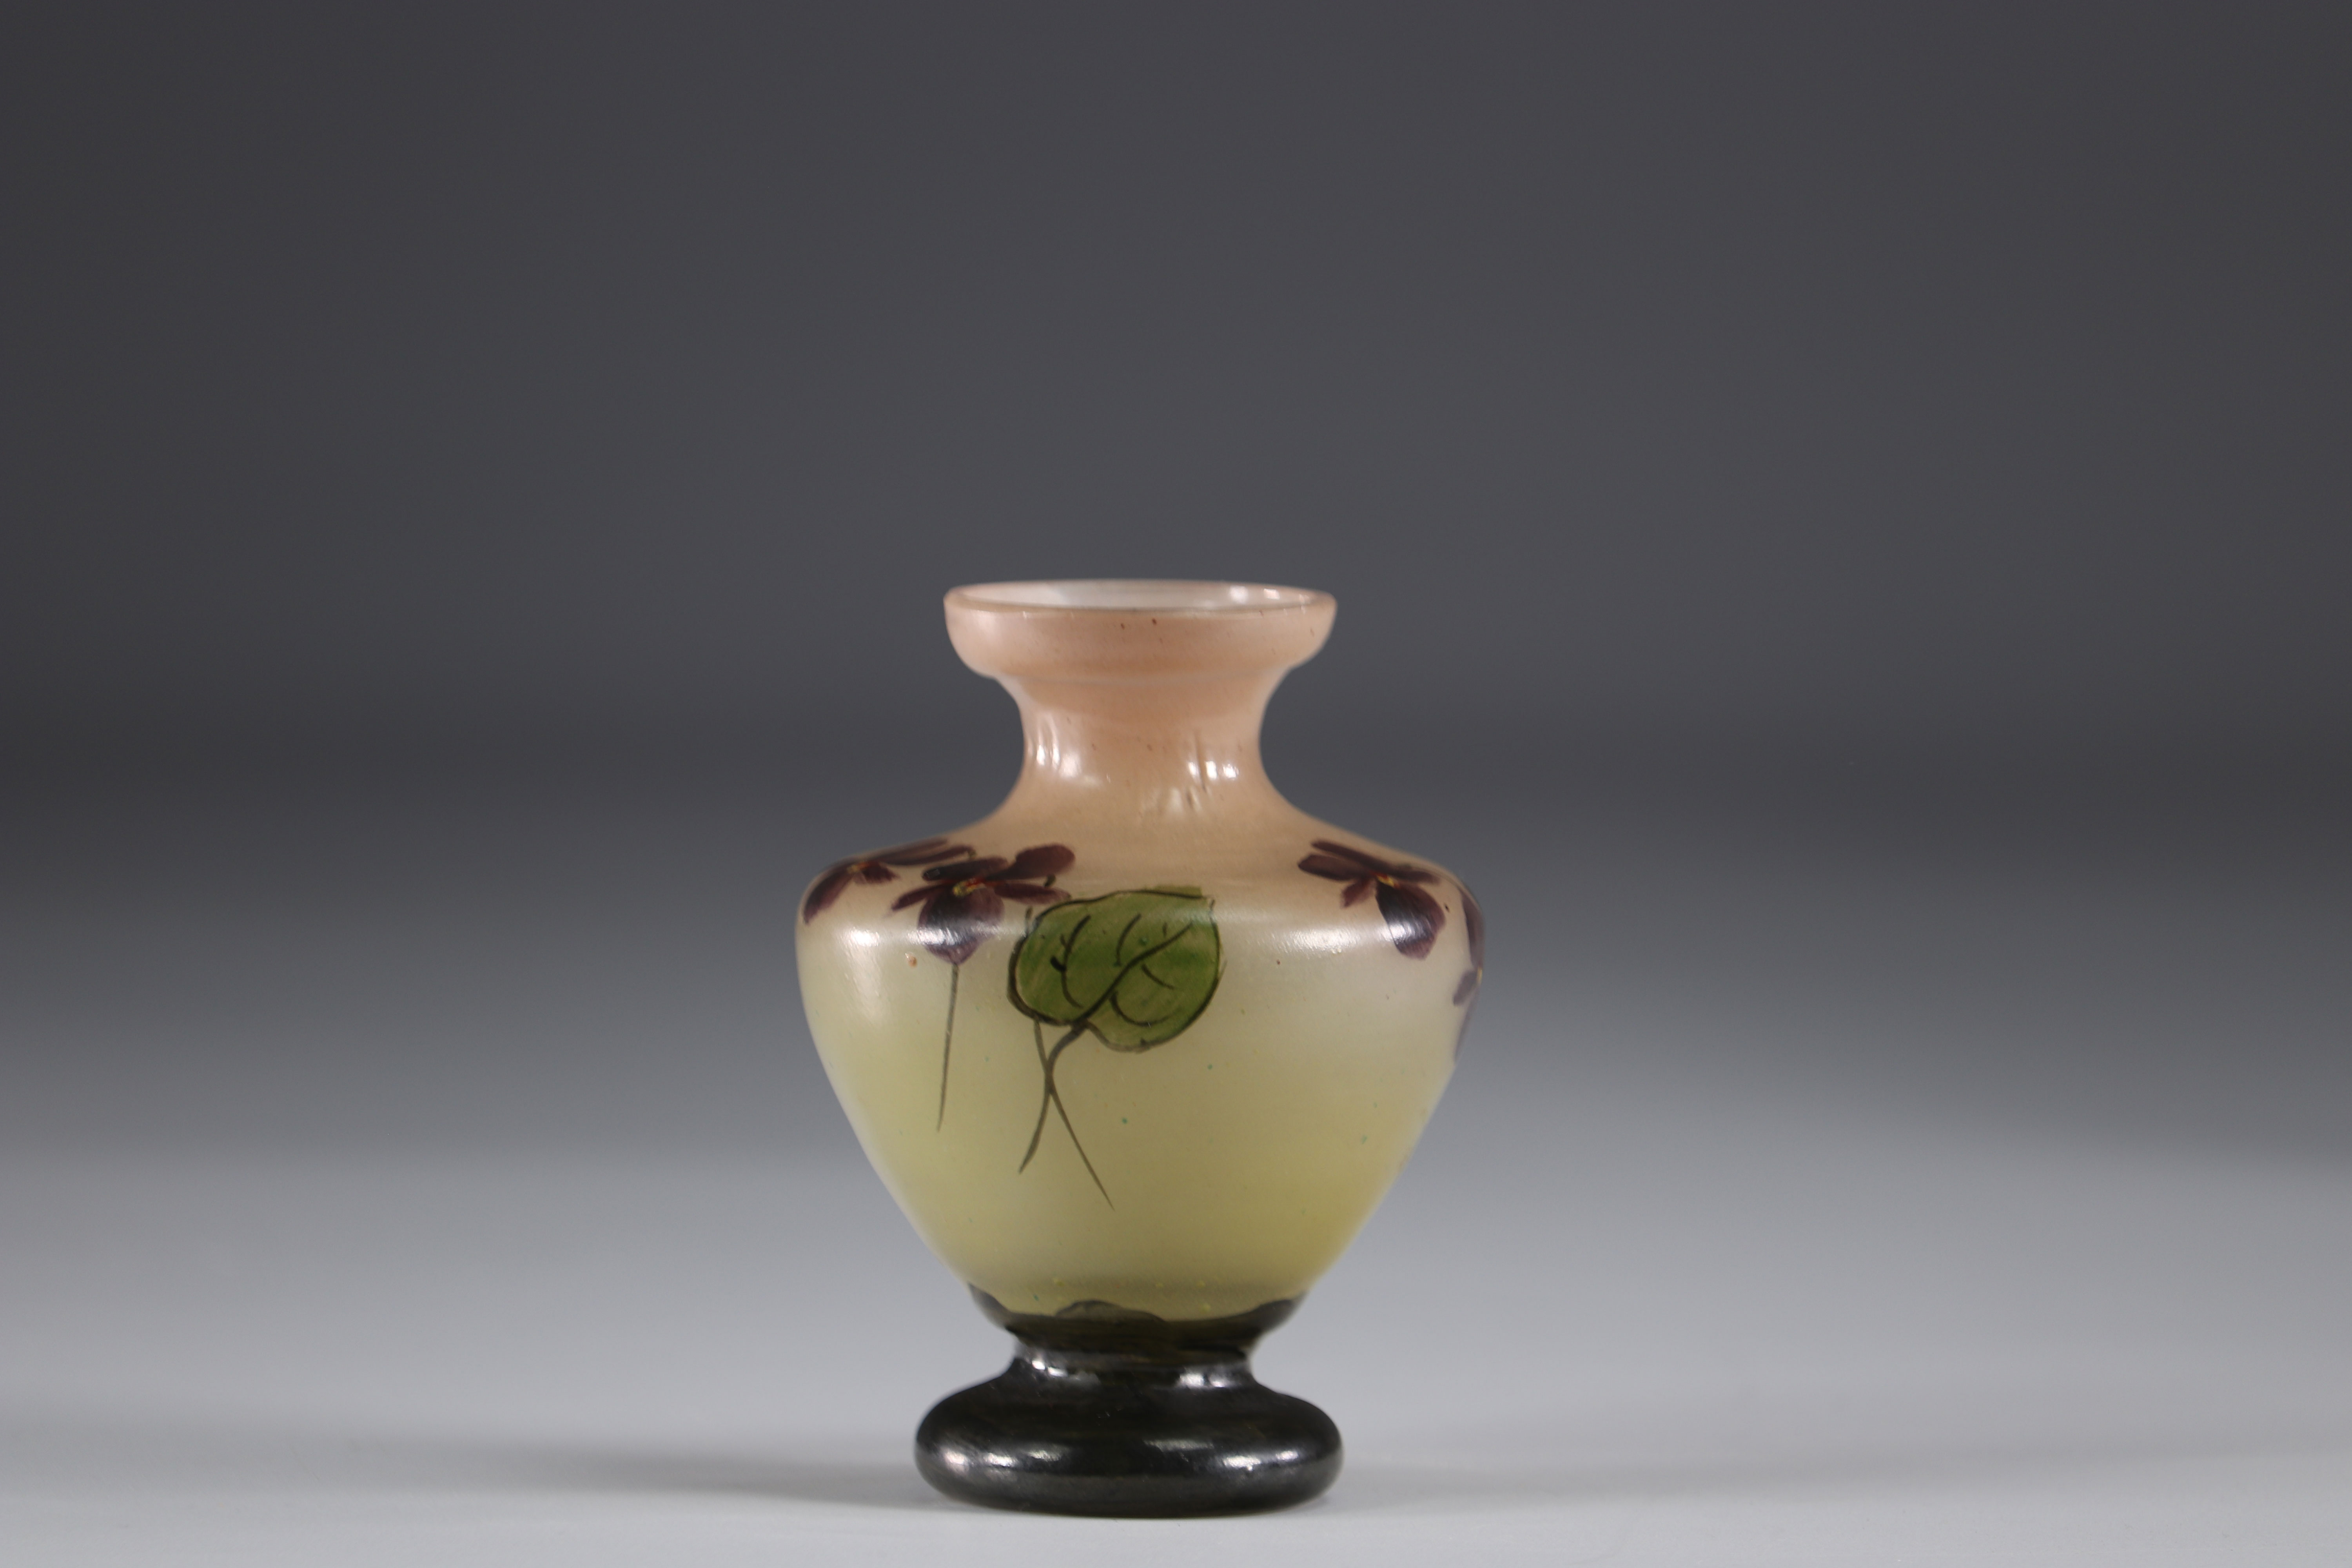 Legras vase decorated with violets